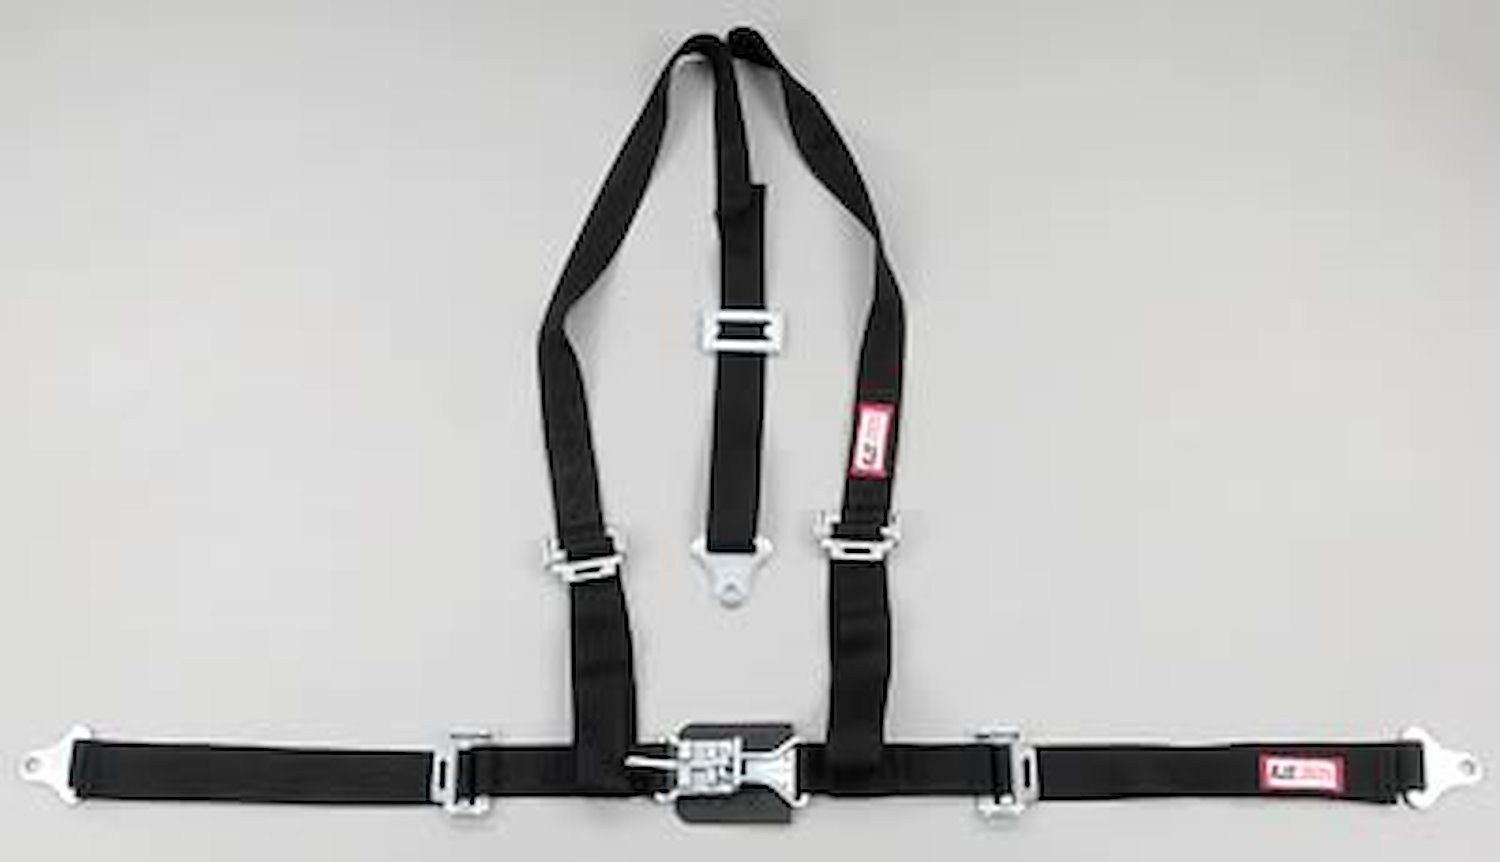 NON-SFI L&L HARNESS 3 PULL DOWN Lap Belt SNAP SEWN IN 2 S.H. Individual ROLL BAR Mount w/STERNUM STRAP WRAP/SNAP RED